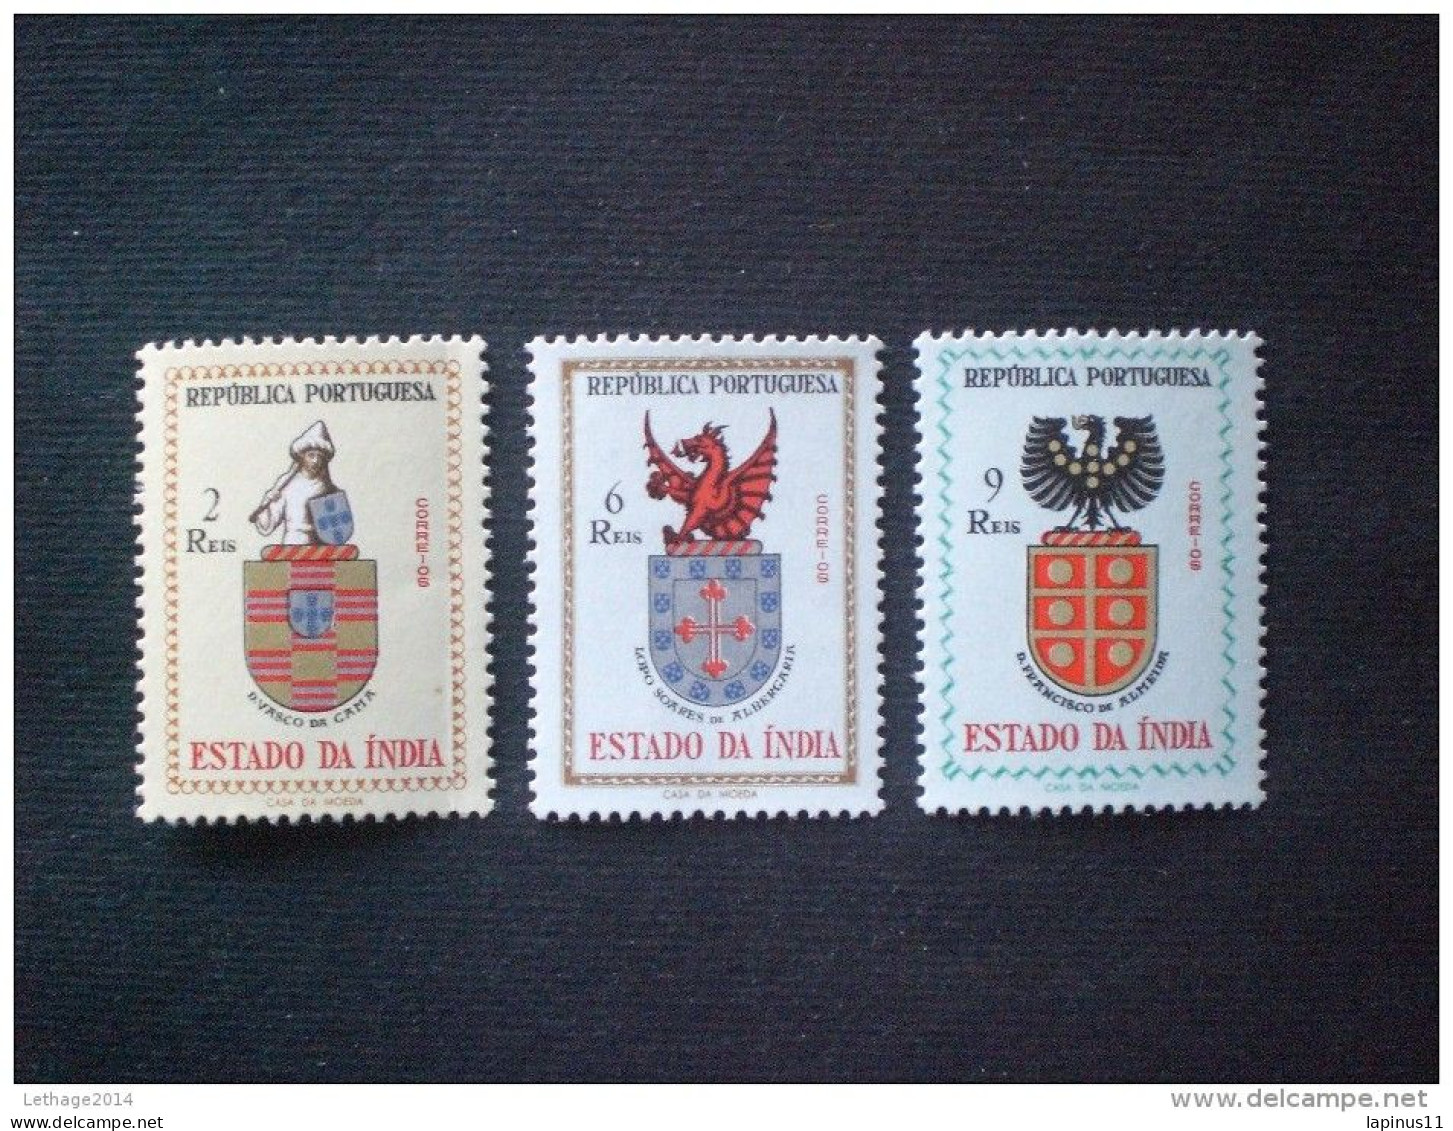 STAMPS INDIA PORTOGHESE 1958 Coat Of Arms MNH - Portuguese India